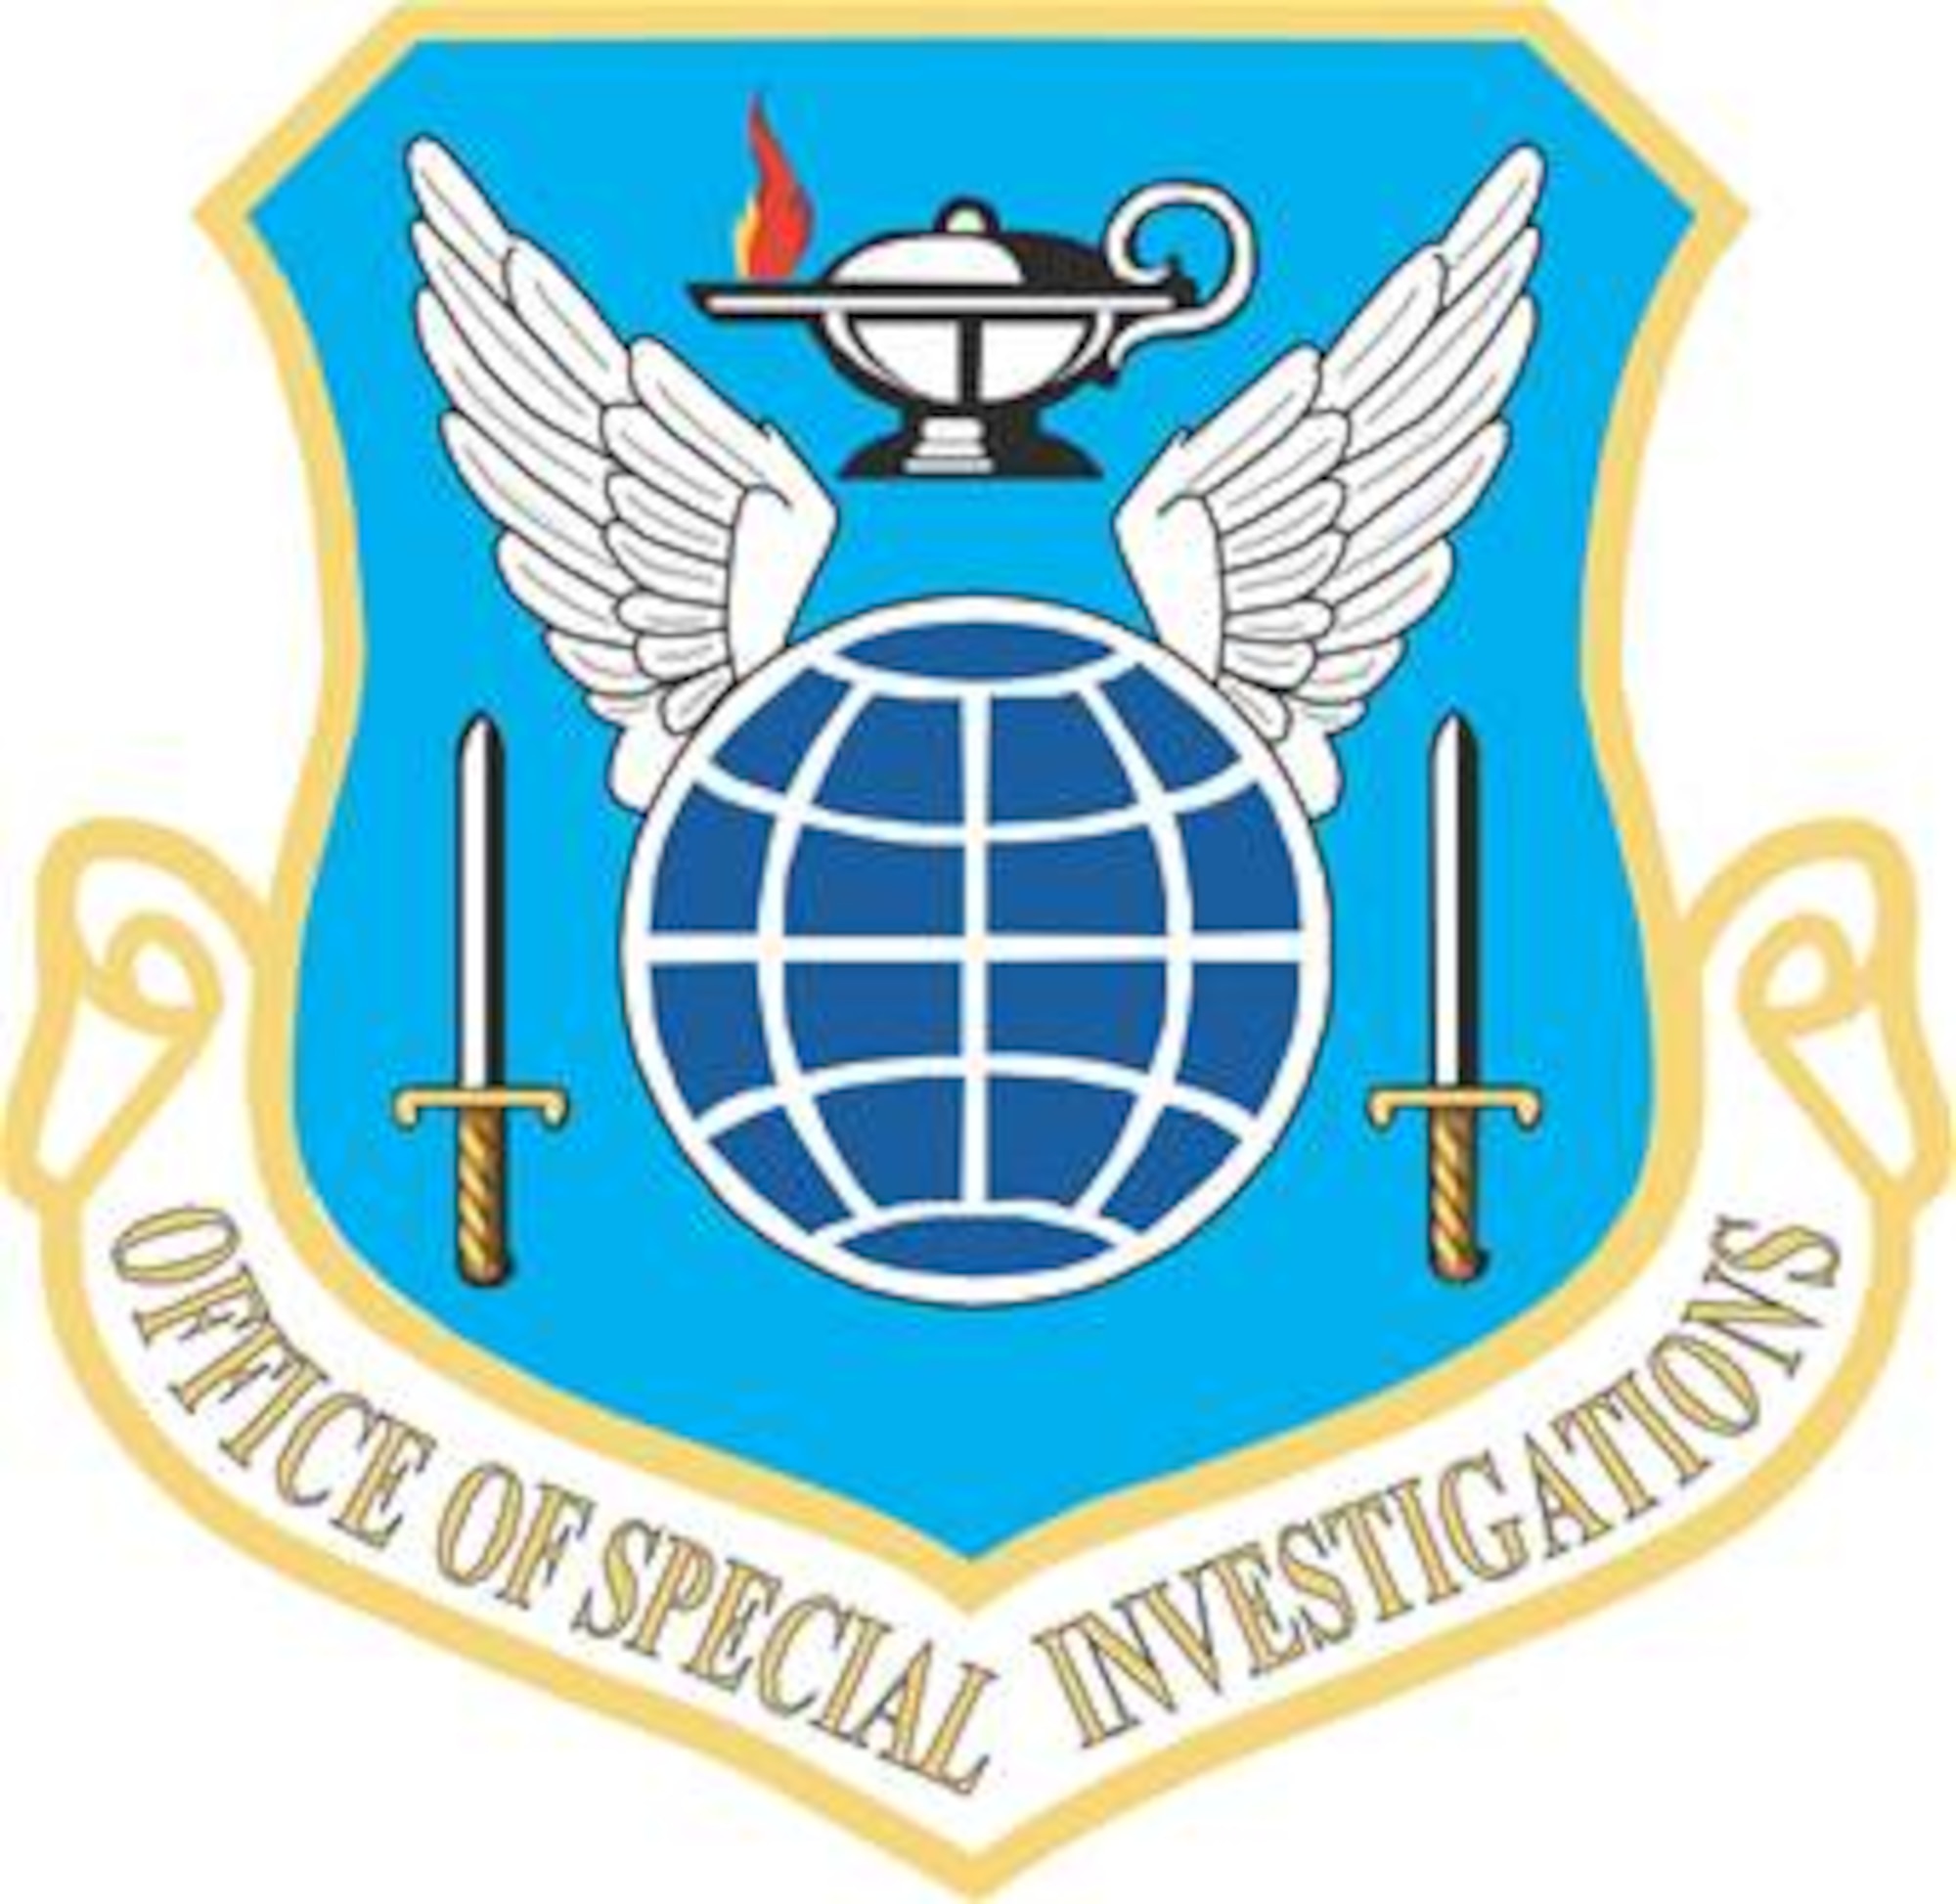 The Air Force Office of Speical Investigations is recruiting potential special agents. Interested members should contact the local AFOSI Detachment for more information. AFOSI was founded Aug. 1, 1948, at the suggestion of Congress to consolidate investigative activities in the U.S. Air Force. Secretary of the Air Force W. Stuart Symington created AFOSI and patterned it after the FBI. He appointed Special Agent Joseph Carroll, an assistant to FBI Director J. Edgar Hoover, as the first AFOSI commander and charged him with providing independent, unbiased and centrally directed investigations of criminal activity in the Air Force.

